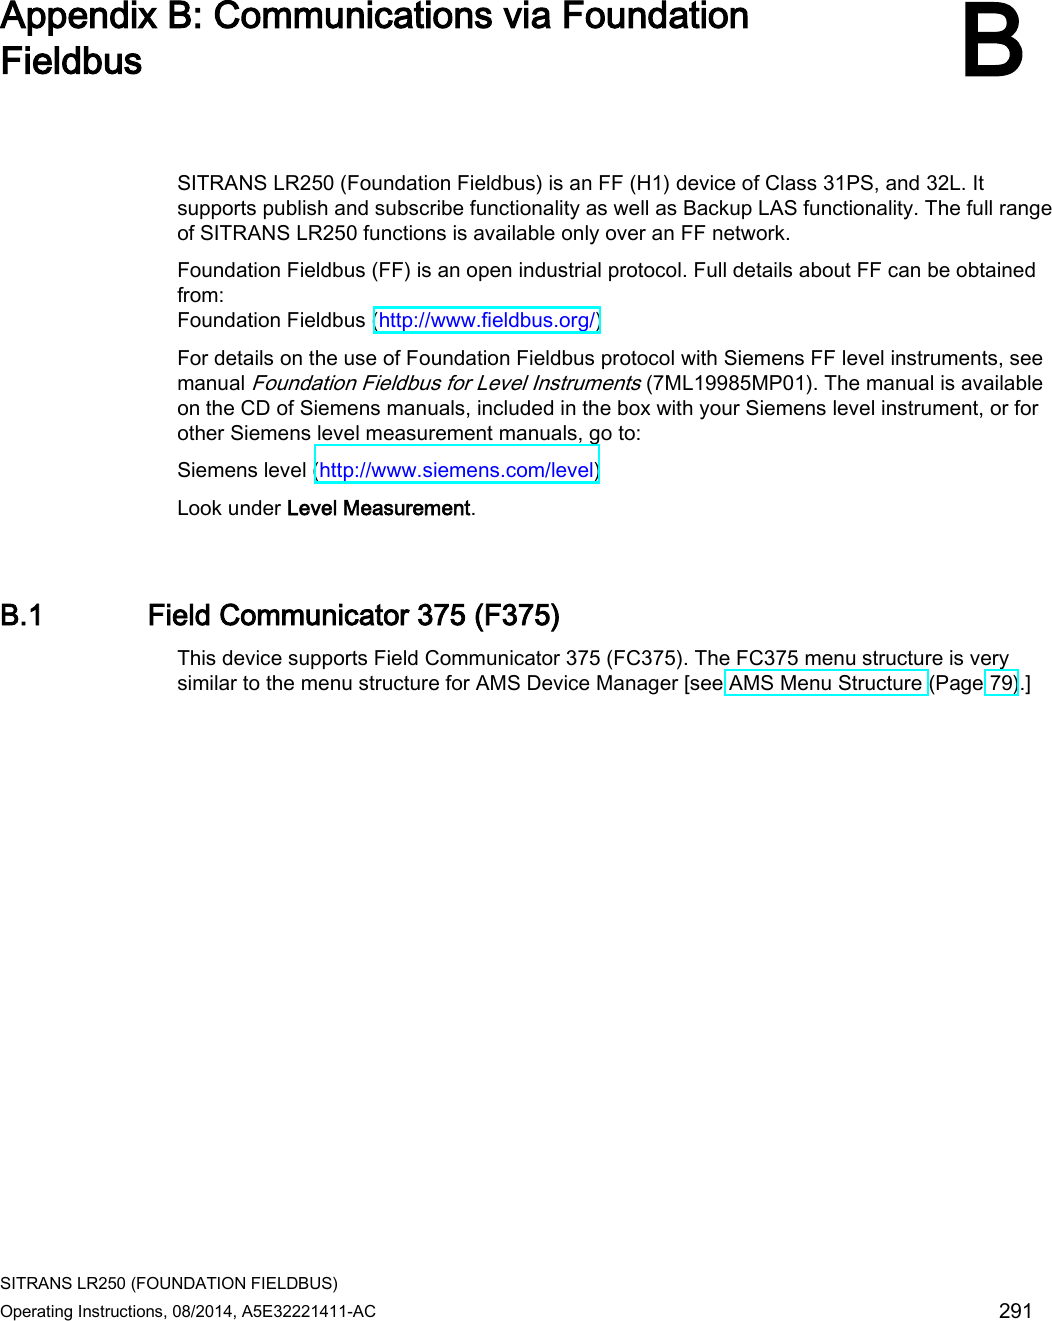  SITRANS LR250 (FOUNDATION FIELDBUS) Operating Instructions, 08/2014, A5E32221411-AC 291  Appendix B: Communications via Foundation Fieldbus B  SITRANS LR250 (Foundation Fieldbus) is an FF (H1) device of Class 31PS, and 32L. It supports publish and subscribe functionality as well as Backup LAS functionality. The full range of SITRANS LR250 functions is available only over an FF network. Foundation Fieldbus (FF) is an open industrial protocol. Full details about FF can be obtained from: Foundation Fieldbus (http://www.fieldbus.org/) For details on the use of Foundation Fieldbus protocol with Siemens FF level instruments, see manual Foundation Fieldbus for Level Instruments (7ML19985MP01). The manual is available on the CD of Siemens manuals, included in the box with your Siemens level instrument, or for other Siemens level measurement manuals, go to:  Siemens level (http://www.siemens.com/level) Look under Level Measurement. B.1 Field Communicator 375 (F375) This device supports Field Communicator 375 (FC375). The FC375 menu structure is very similar to the menu structure for AMS Device Manager [see AMS Menu Structure (Page 79).] 